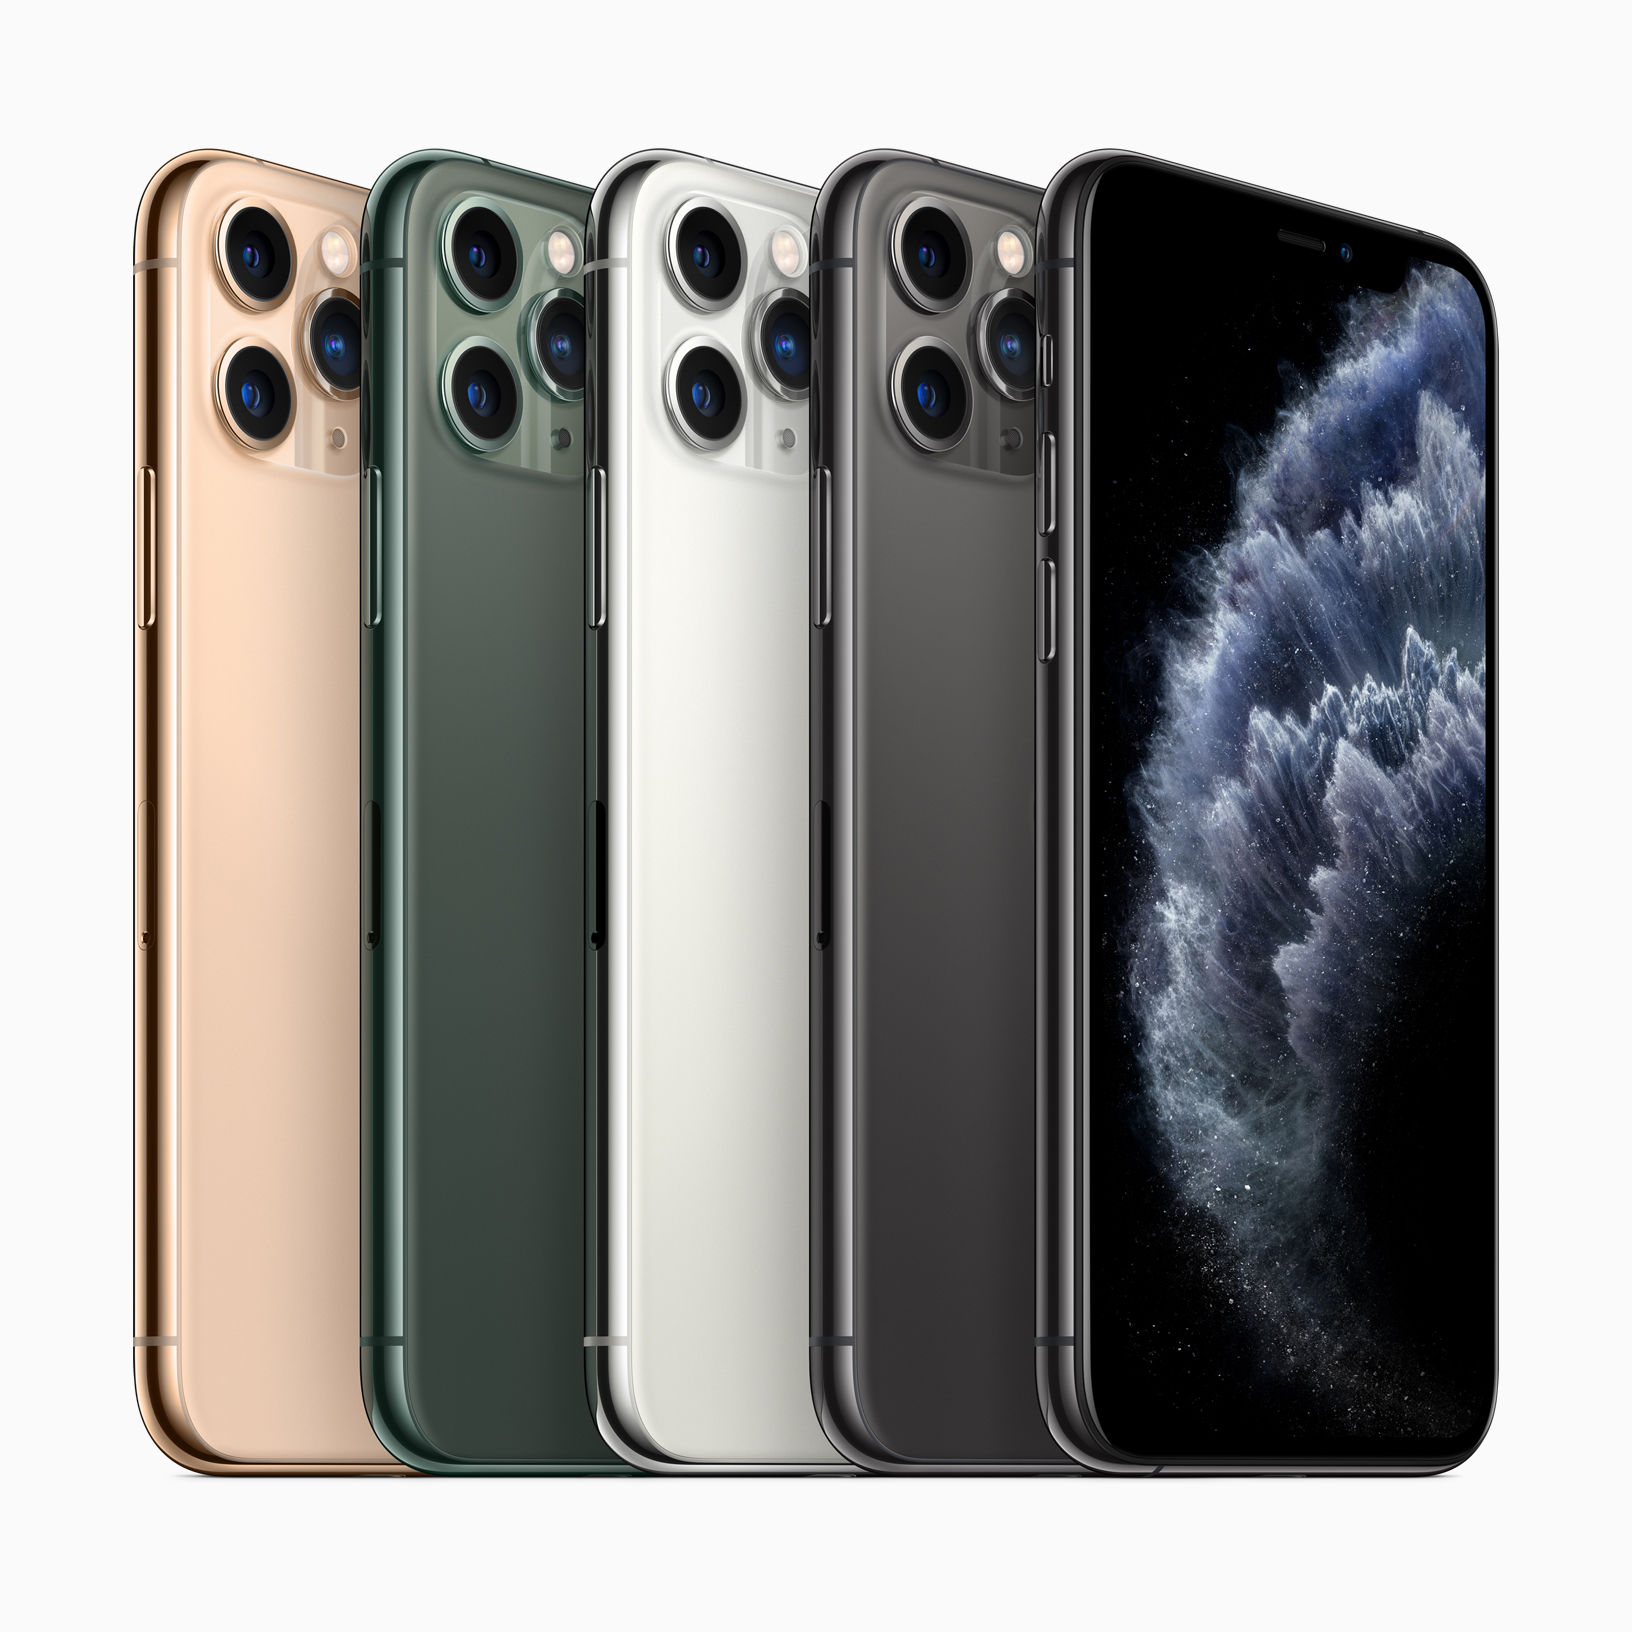 Ming-Chi Kuo: iPhone 11 Demand Better Than Expected - Strong Interest in New Colors